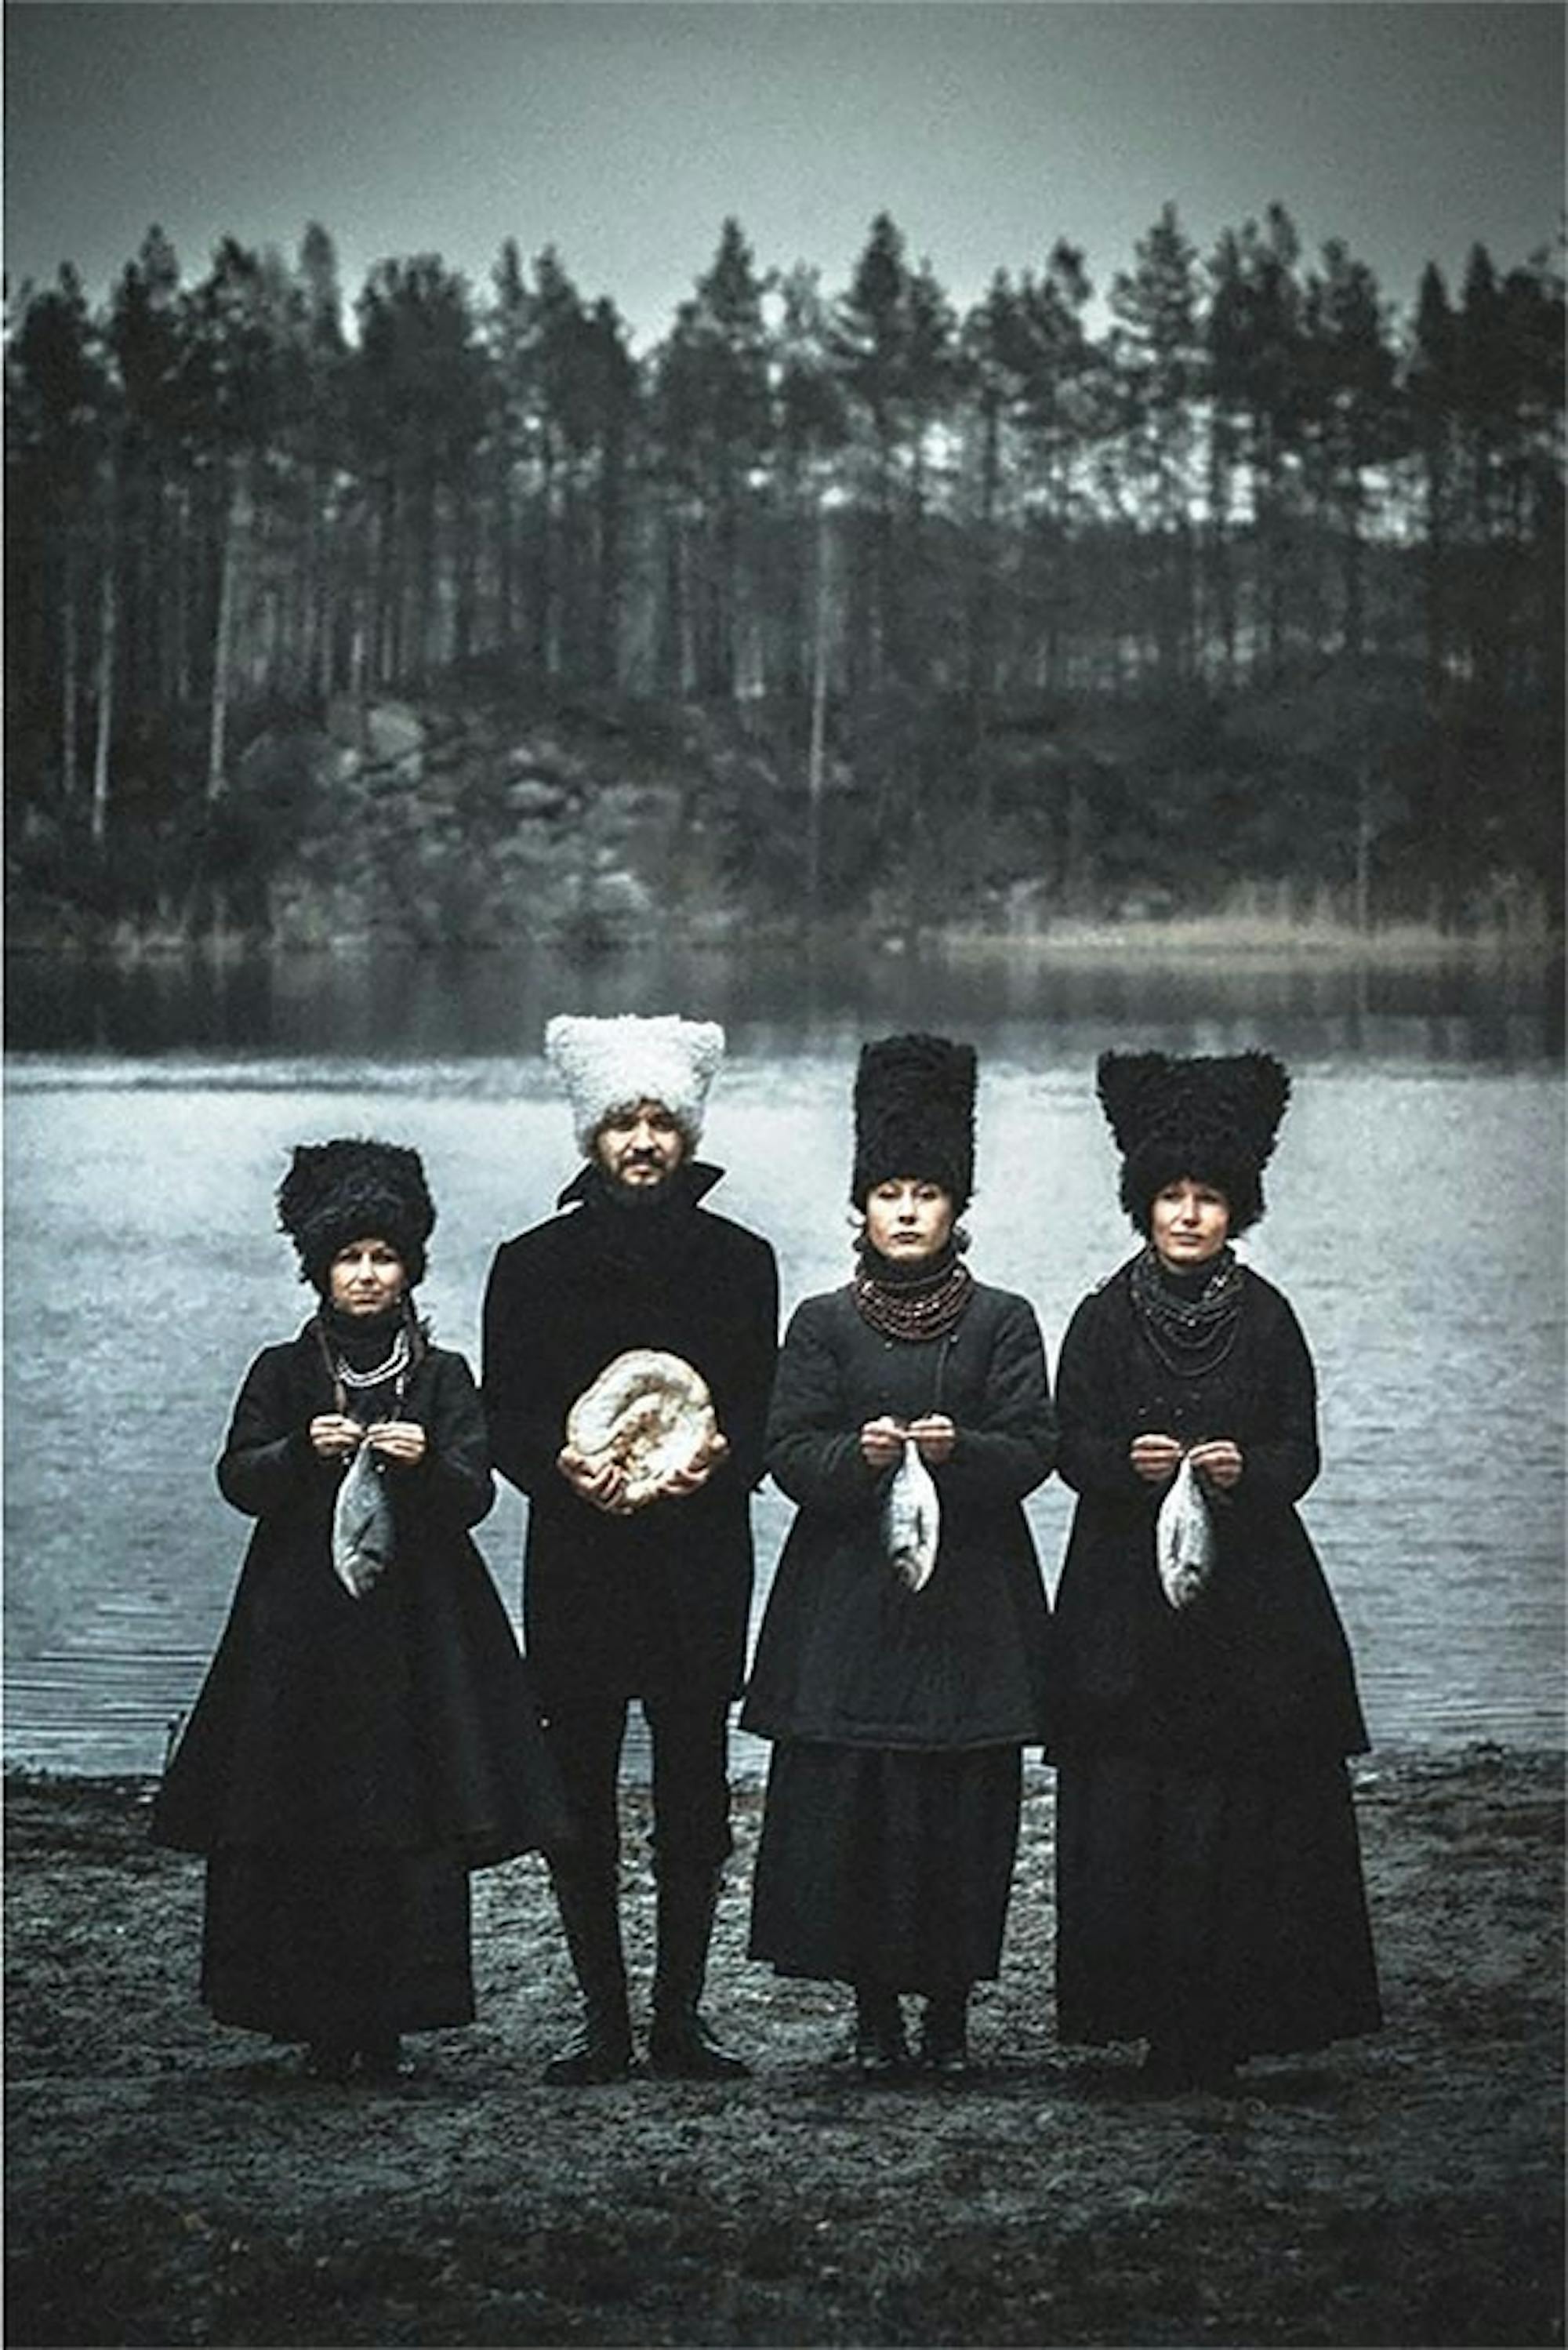 DakhaBrakha wears unique outfits to match their eclectic style.